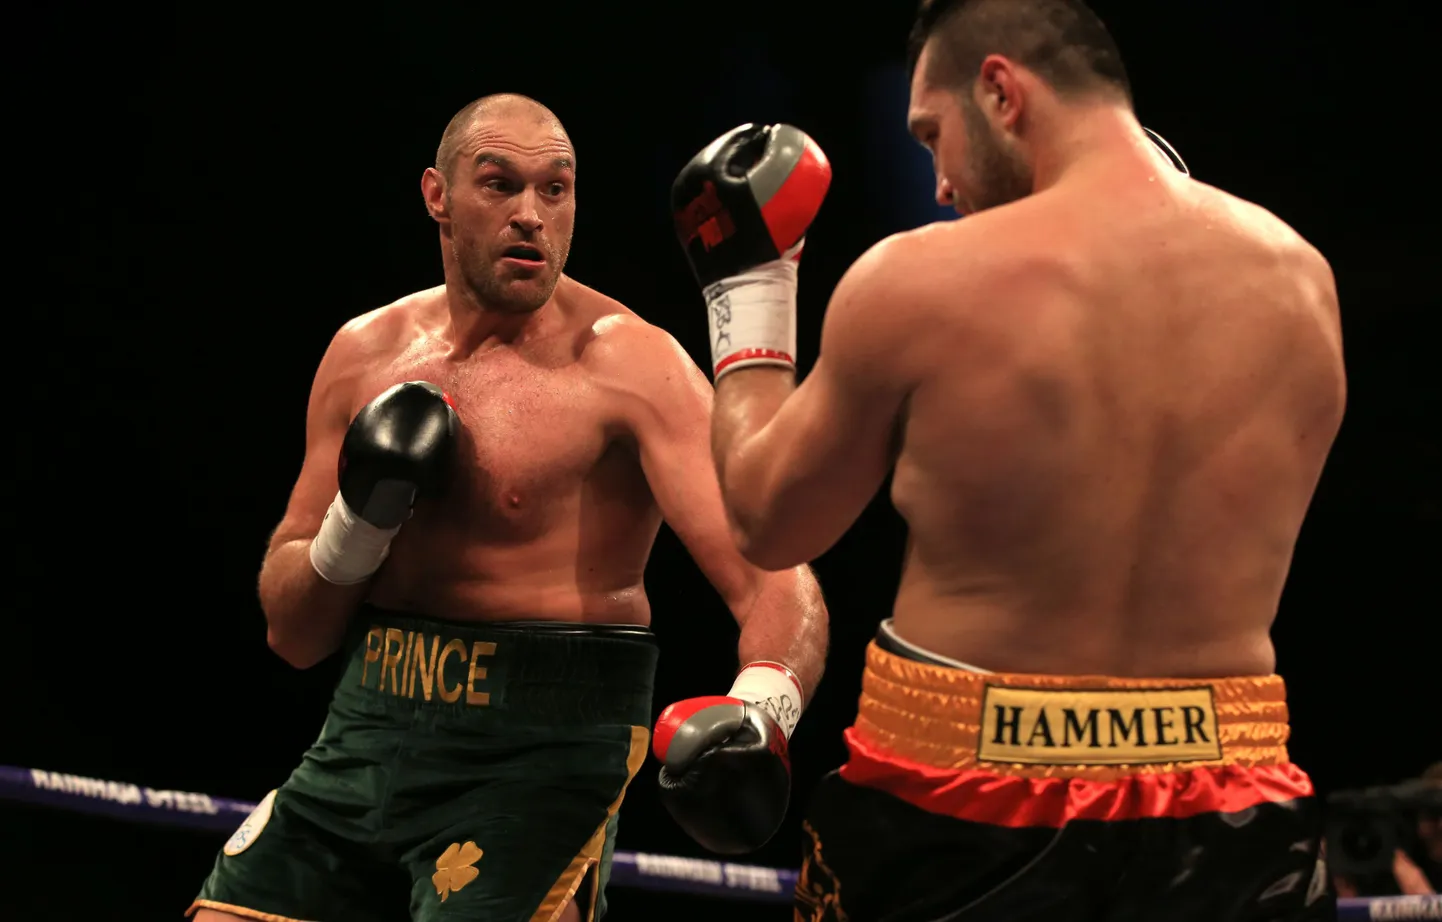 Tyson Fury (left) in action against Christian Hammer in their WBO International Heavyweight Championship bout at the O2 Arena, London.